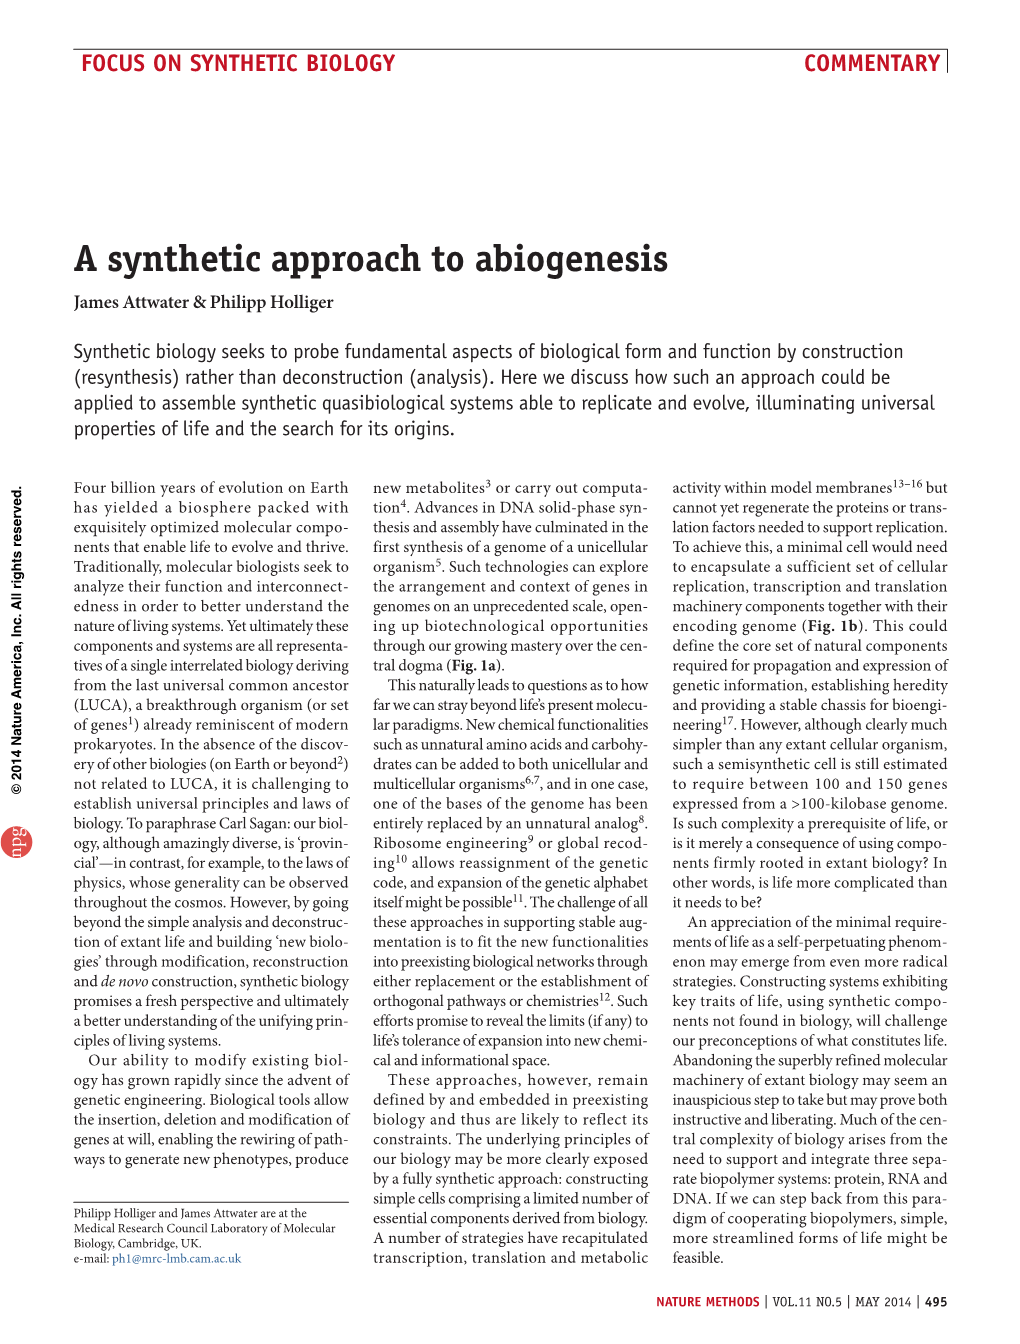 A Synthetic Approach to Abiogenesis James Attwater & Philipp Holliger